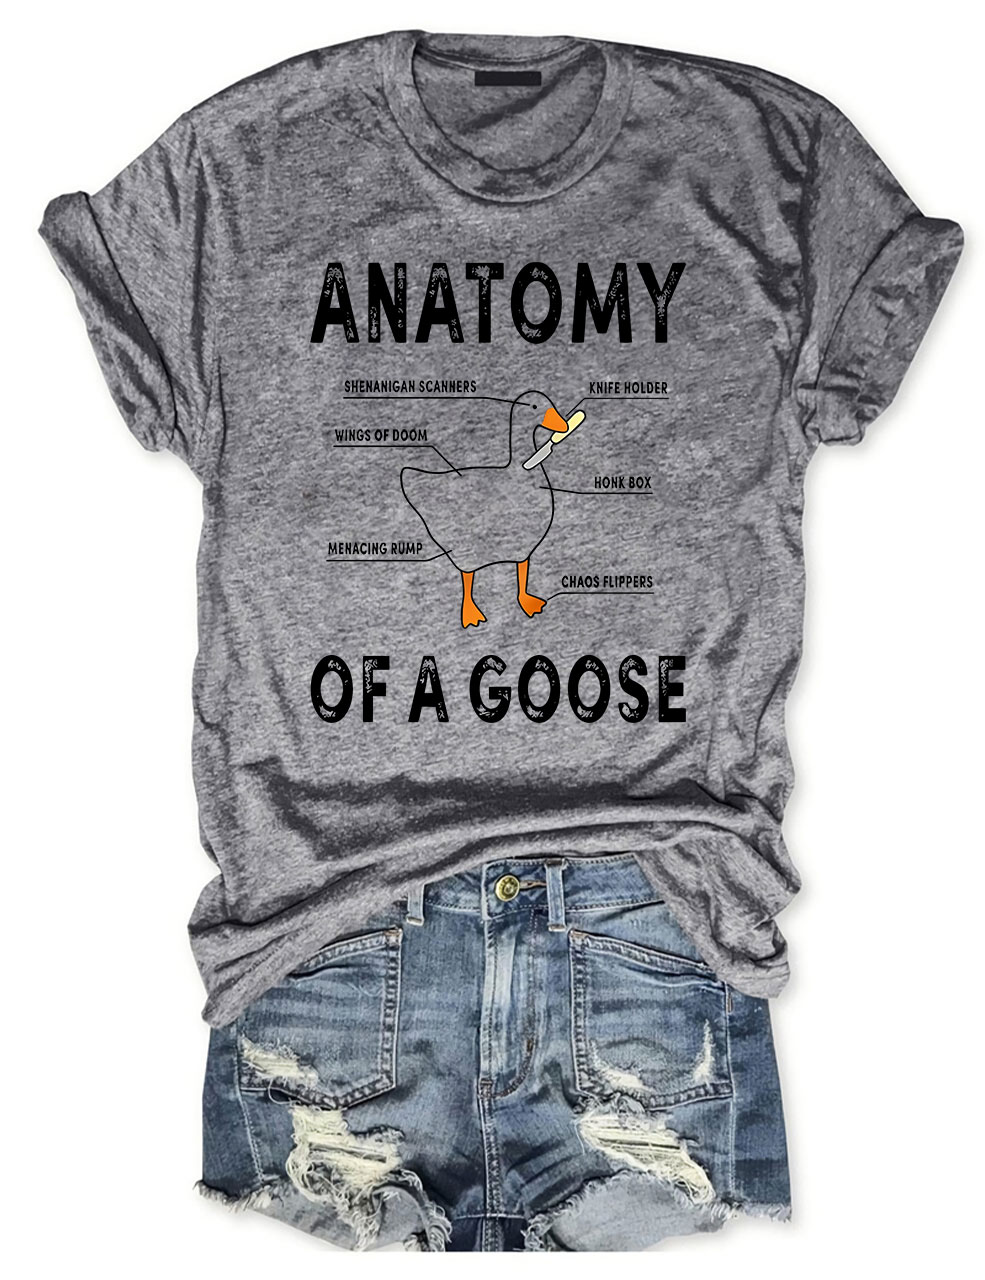 Anatomy of A Goose T-Shirt